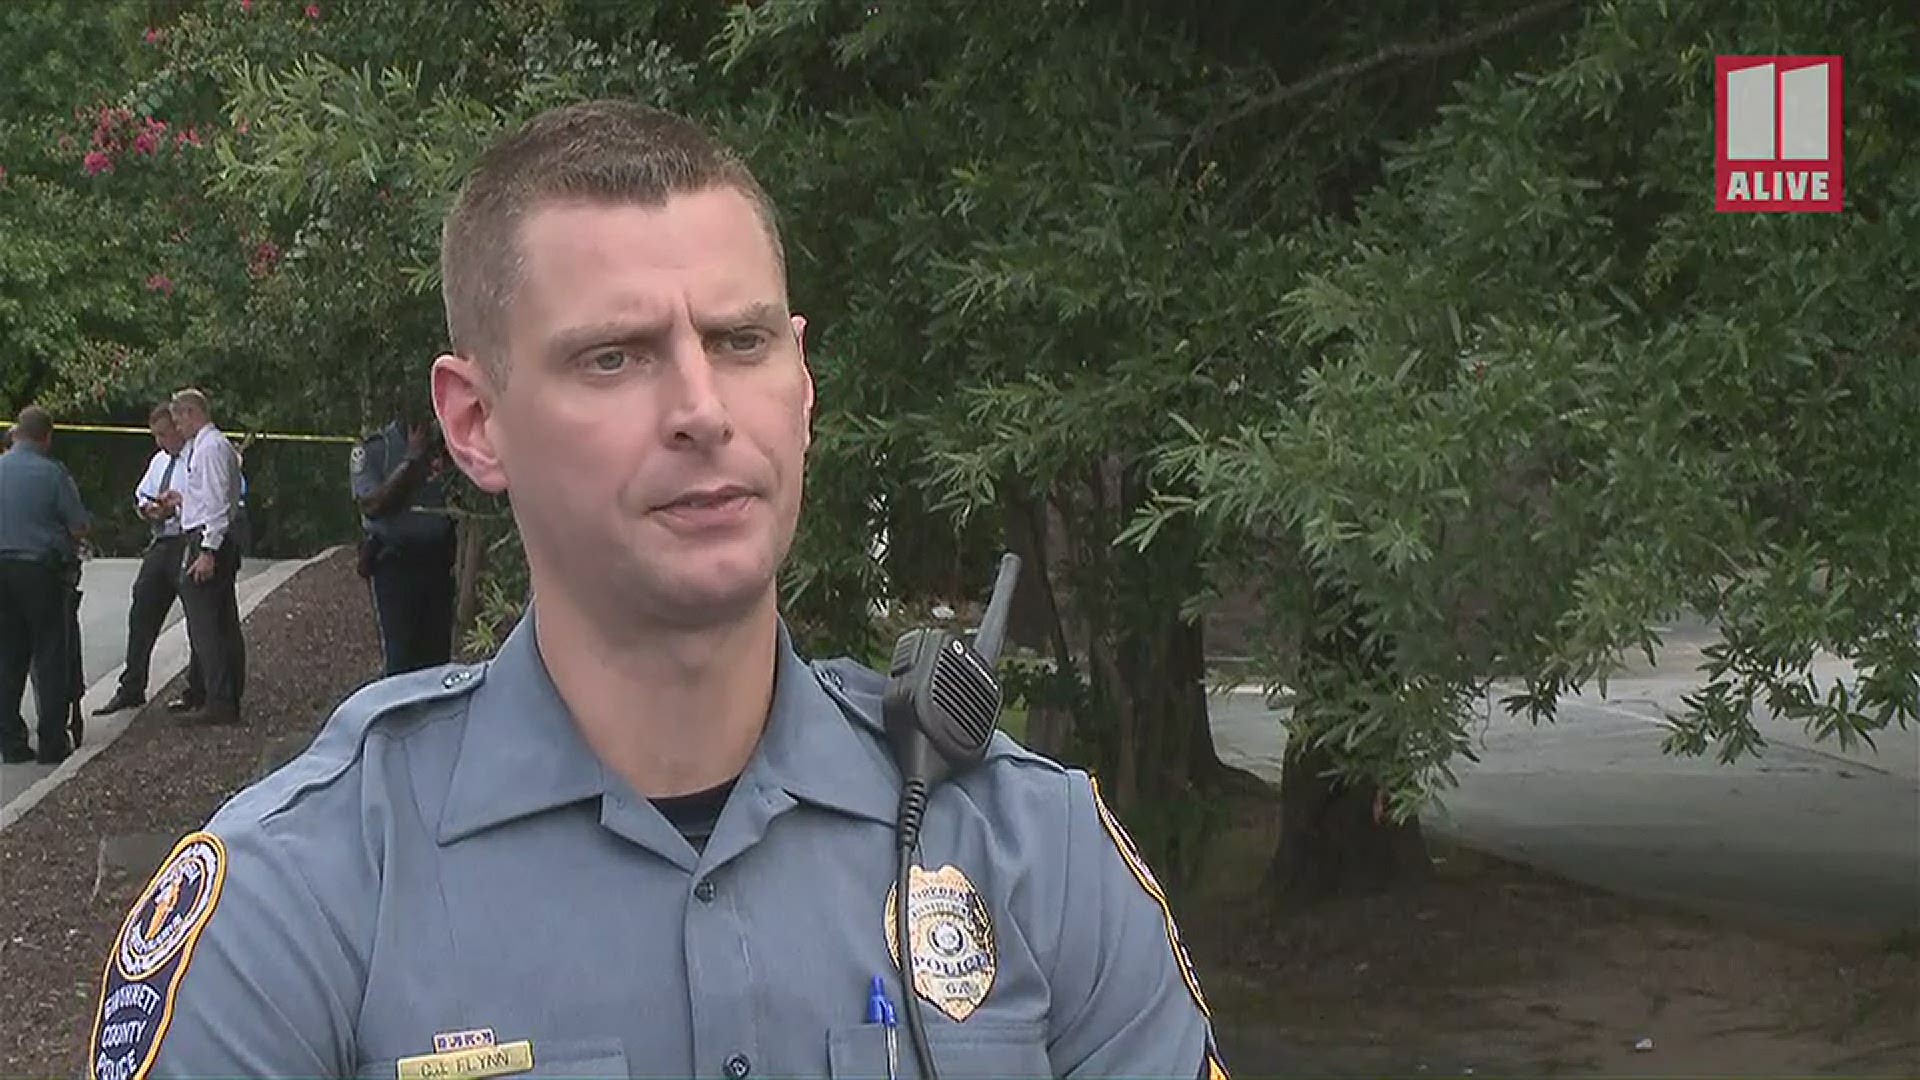 Gwinnett Police Cpl. Collin Flynn said a SWAT K9 officer and a suspect were killed during an officer-involved shooting Wednesday afternoon in Norcross.